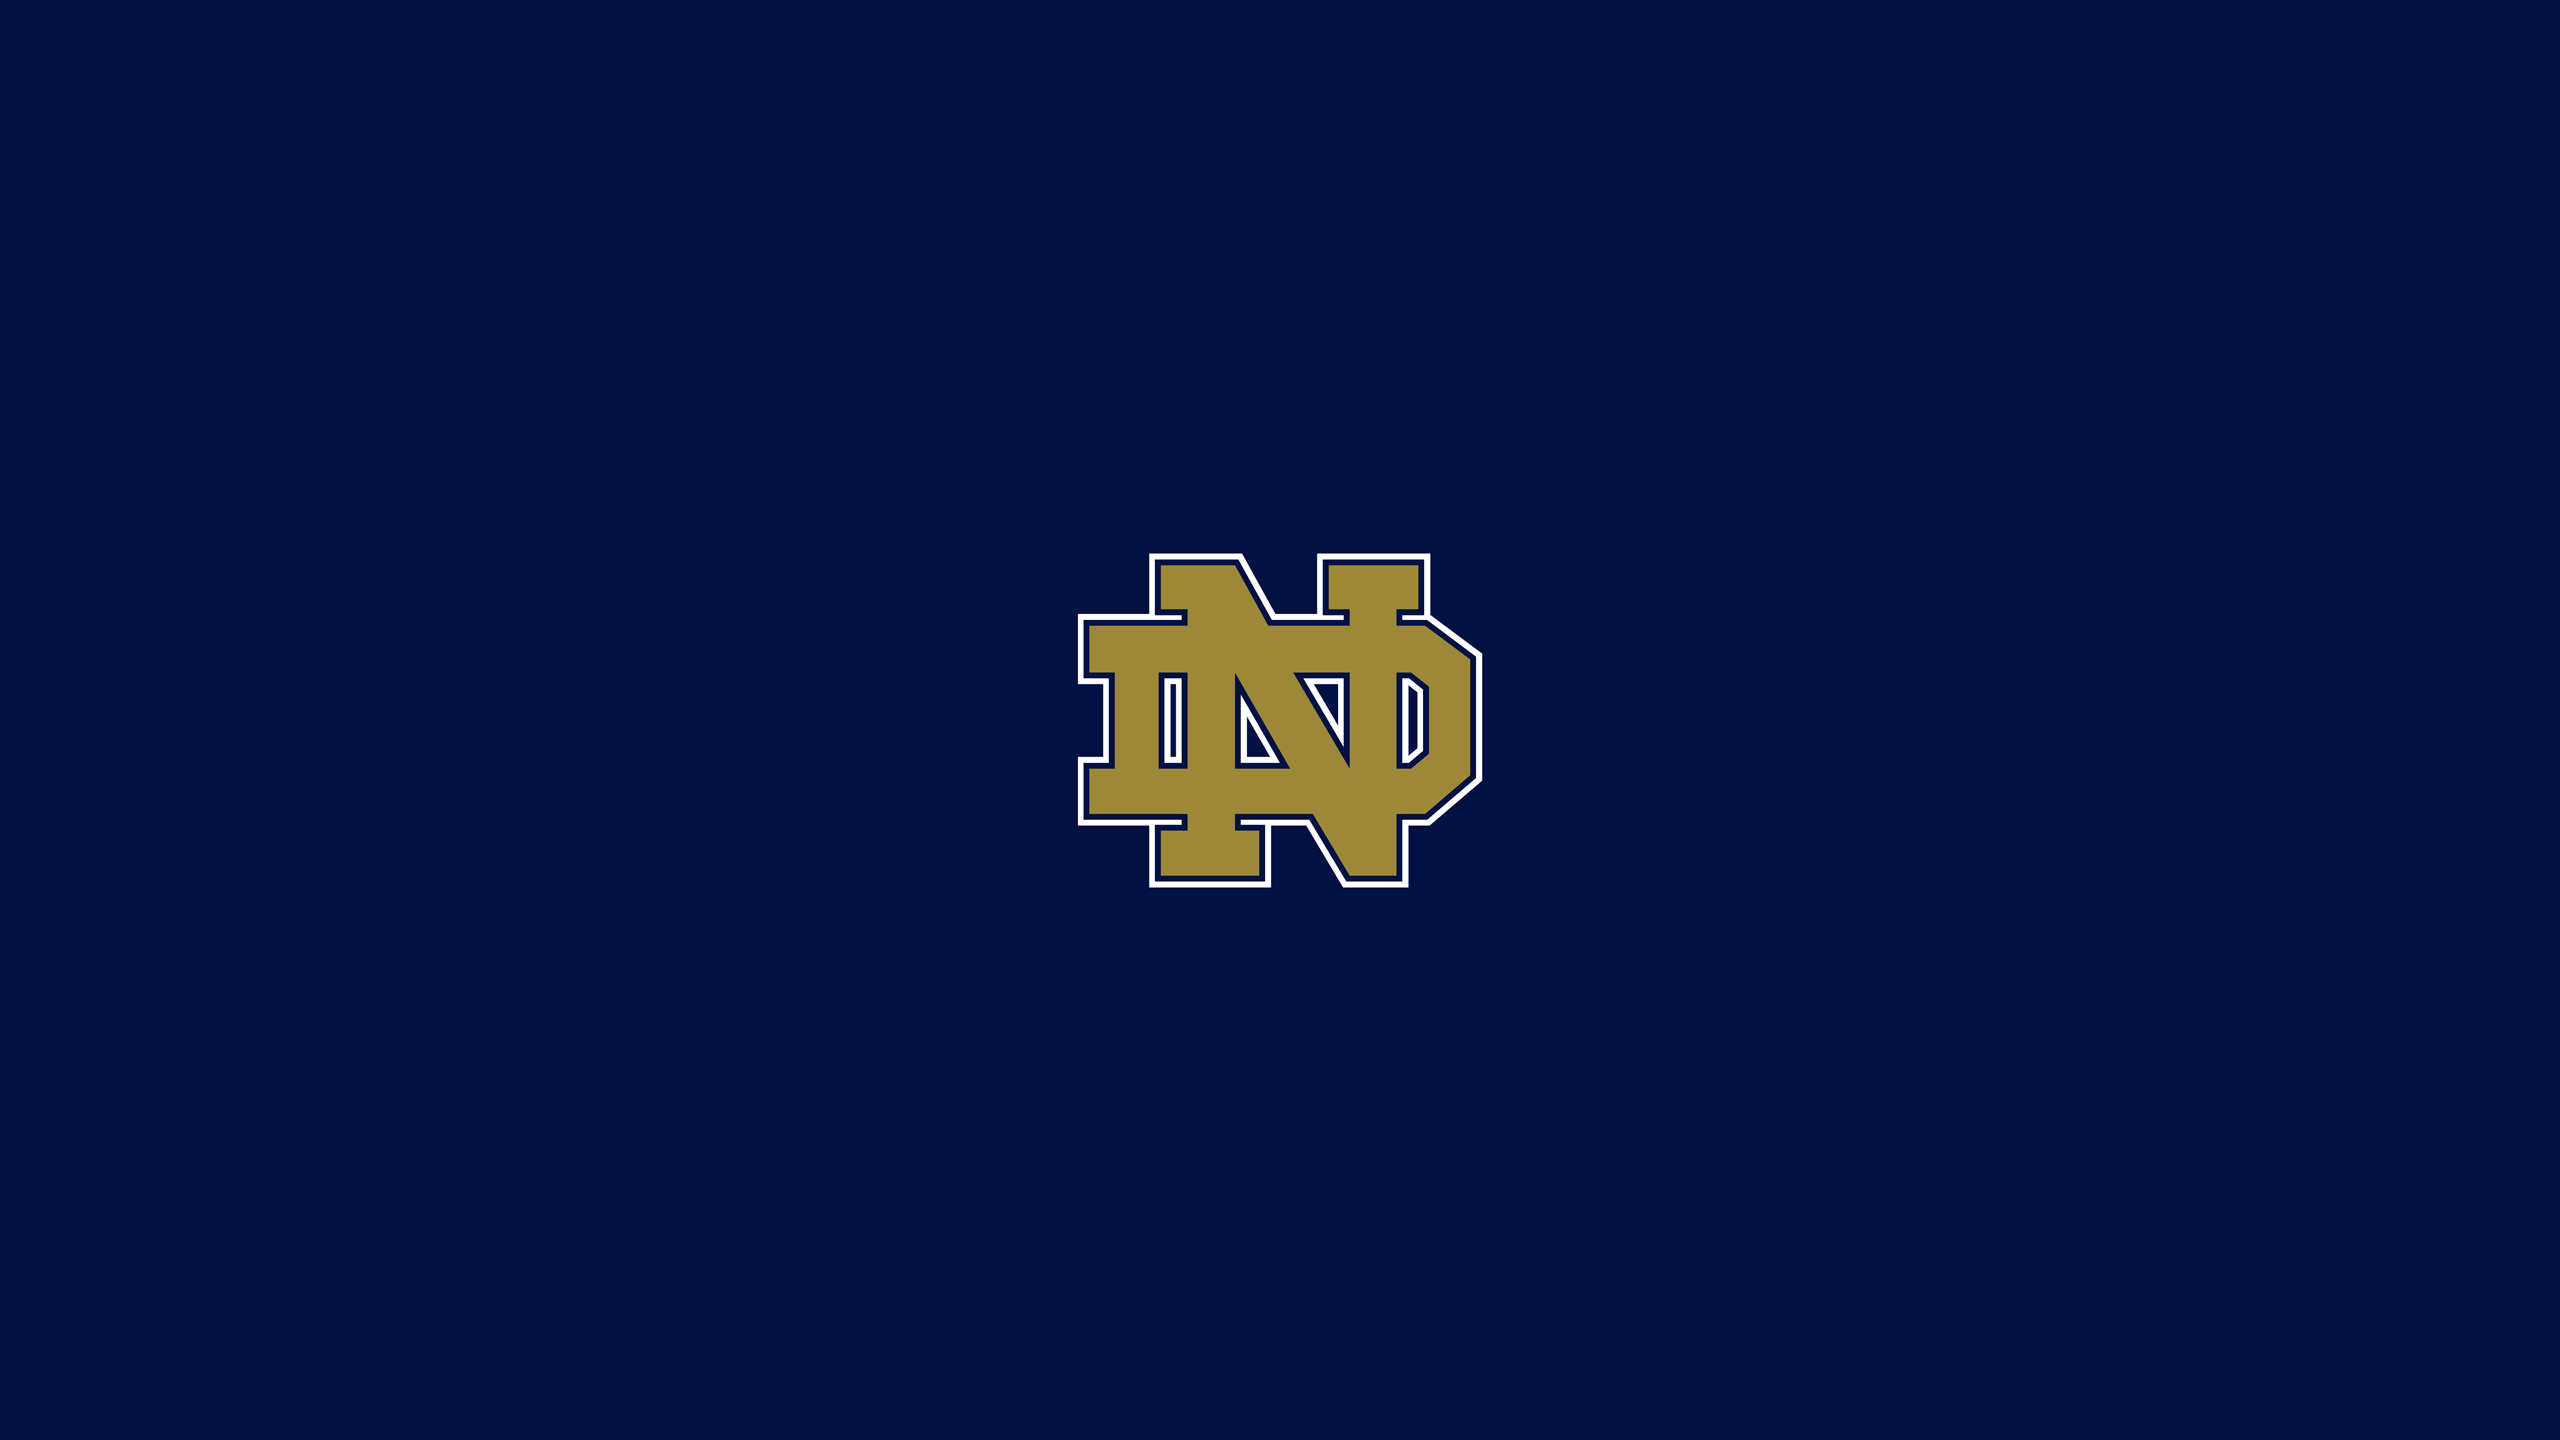 Notre Dame mustangs Wallpaper and Background Image